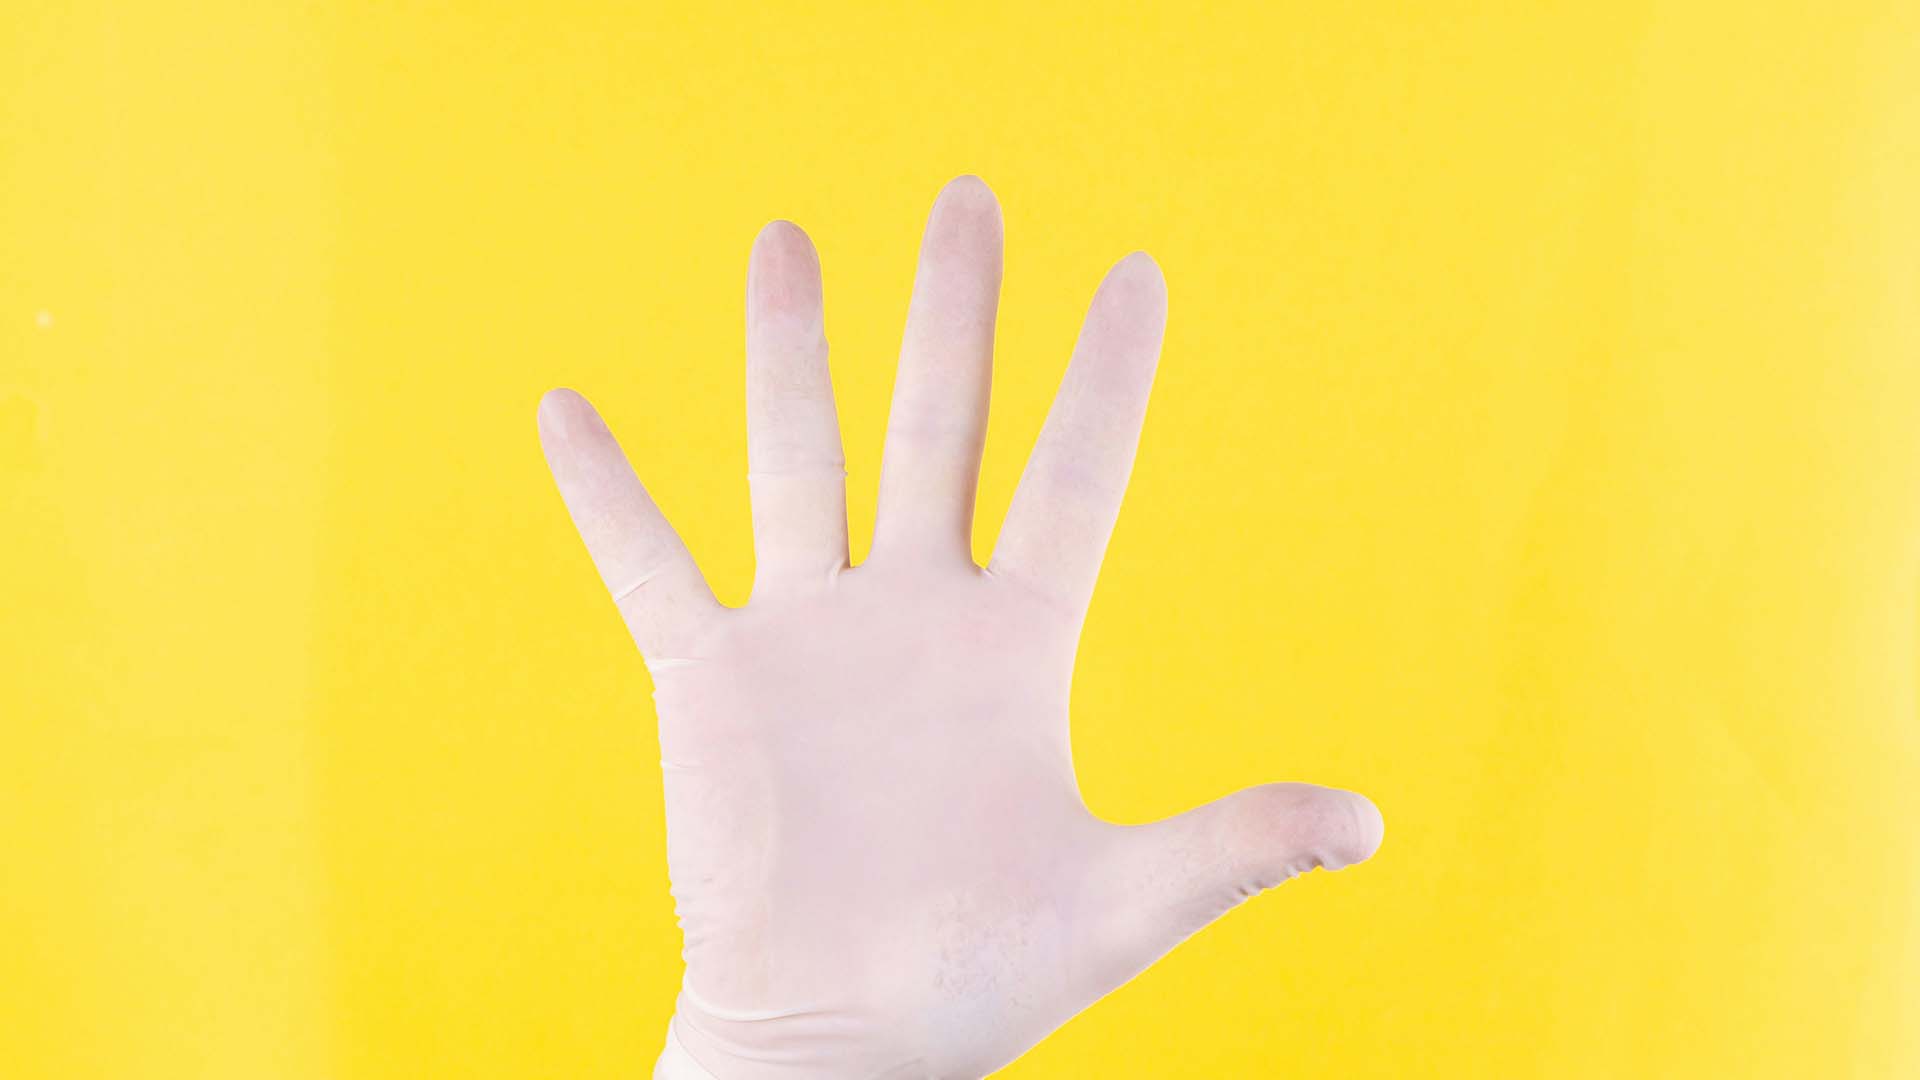 Hand in white glove against yellow background